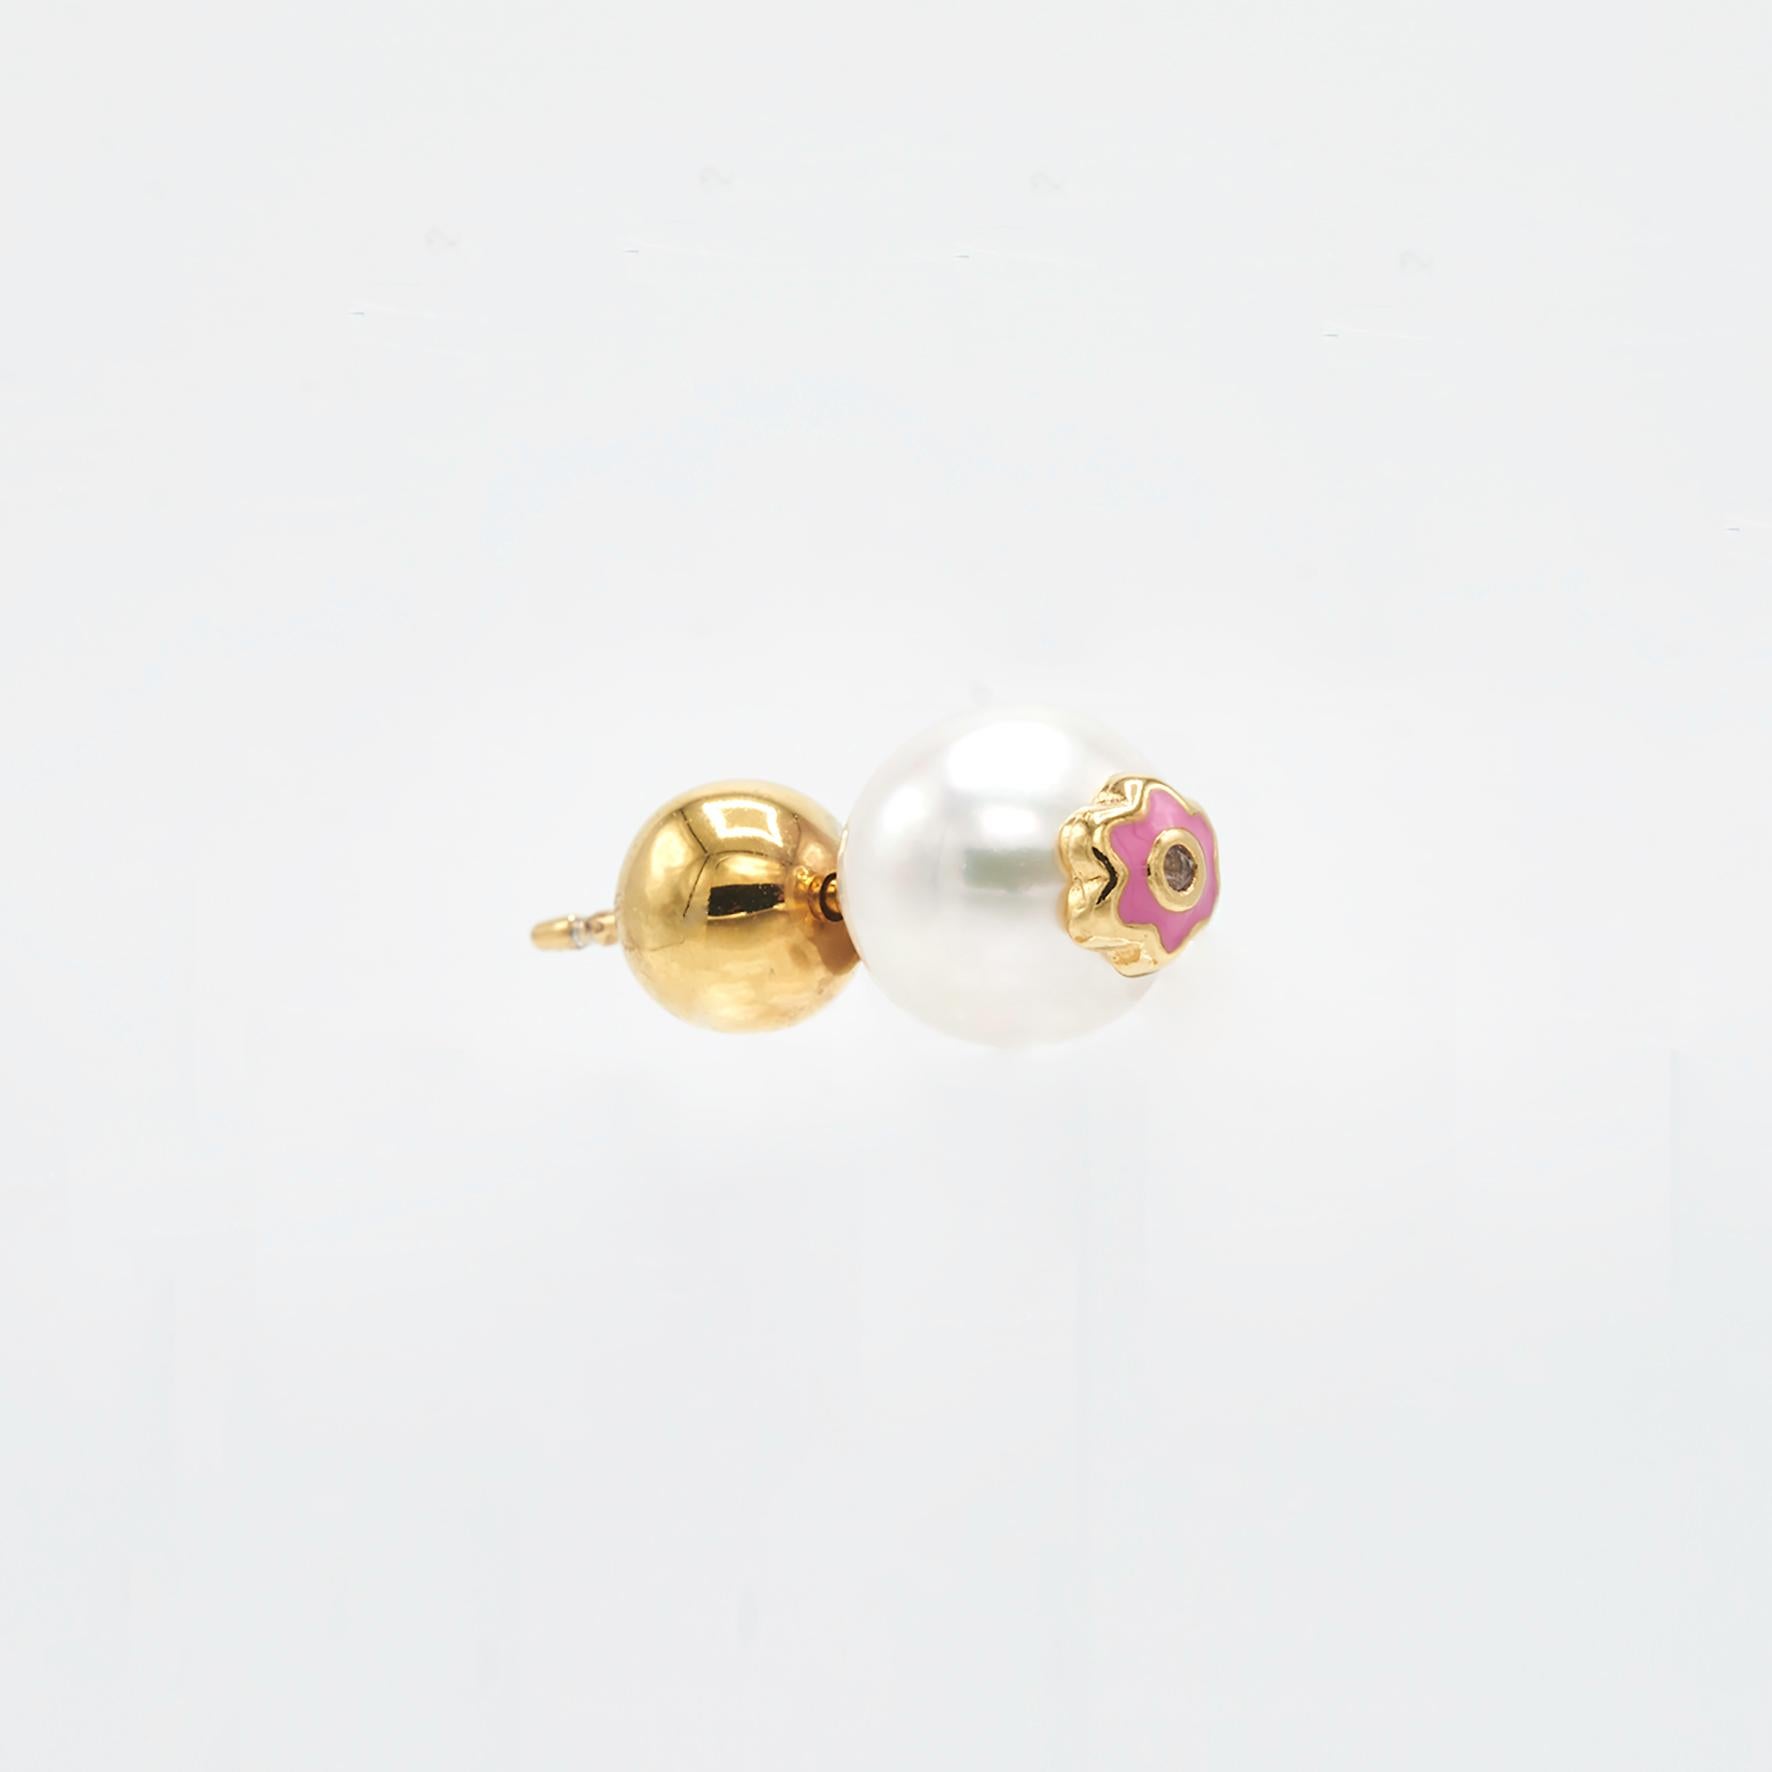 Round pearl ear studs embellished with pink enamel flower. 

Dimensions: 7mm Pearl
Compositions: Sterling Silver 24 K gold plates/ Fresh water pearl/ Pink Enamel/ Cubic Zirconia

SOLD AS PAIRS